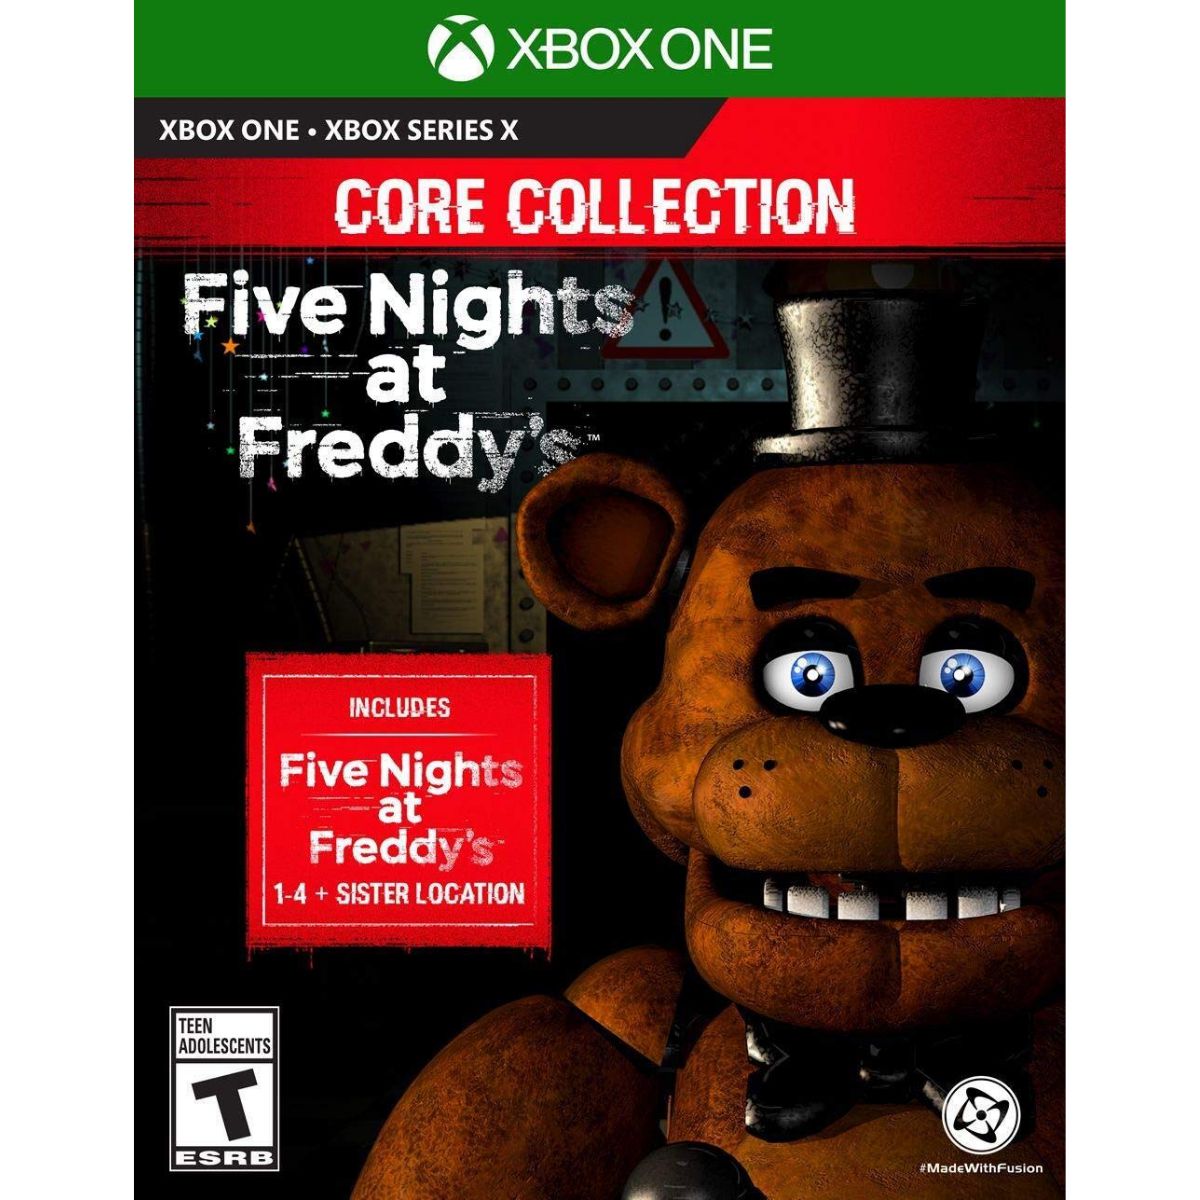 Five Nights At Freddy's: Core Collection - Nintendo Switch